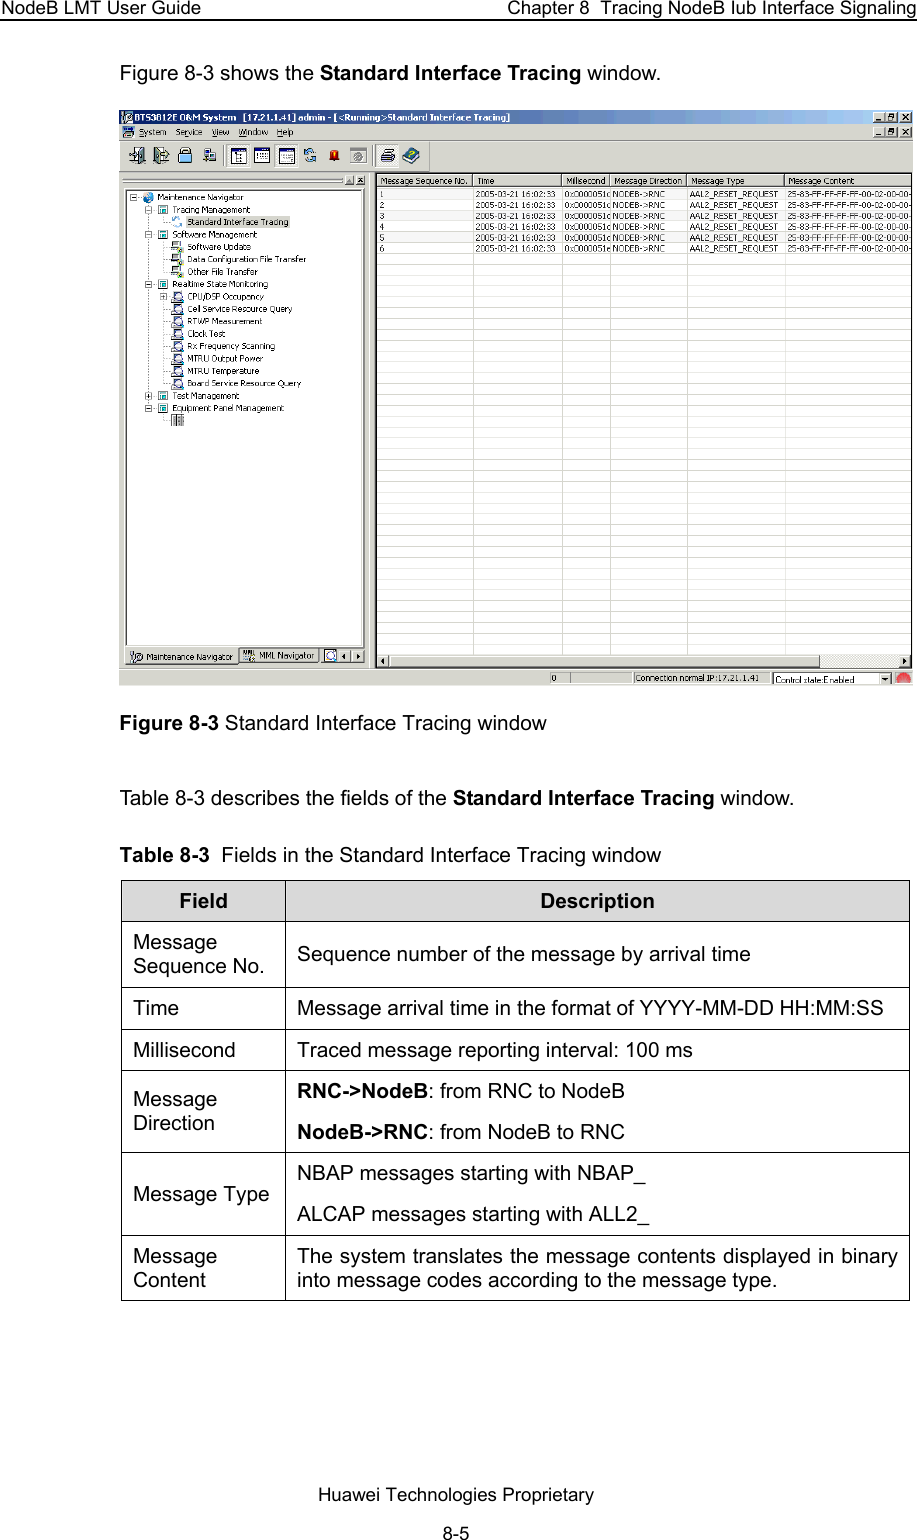 NodeB LMT User Guide  Chapter 8  Tracing NodeB Iub Interface Signaling Figure 8-3 shows the Standard Interface Tracing window.  Figure 8-3 Standard Interface Tracing window Table 8-3 describes the fields of the Standard Interface Tracing window.  Table 8-3  Fields in the Standard Interface Tracing window Field   Description Message Sequence No.  Sequence number of the message by arrival time Time  Message arrival time in the format of YYYY-MM-DD HH:MM:SS Millisecond  Traced message reporting interval: 100 ms Message Direction RNC-&gt;NodeB: from RNC to NodeB  NodeB-&gt;RNC: from NodeB to RNC Message Type NBAP messages starting with NBAP_ ALCAP messages starting with ALL2_ Message Content The system translates the message contents displayed in binary into message codes according to the message type.  Huawei Technologies Proprietary 8-5 